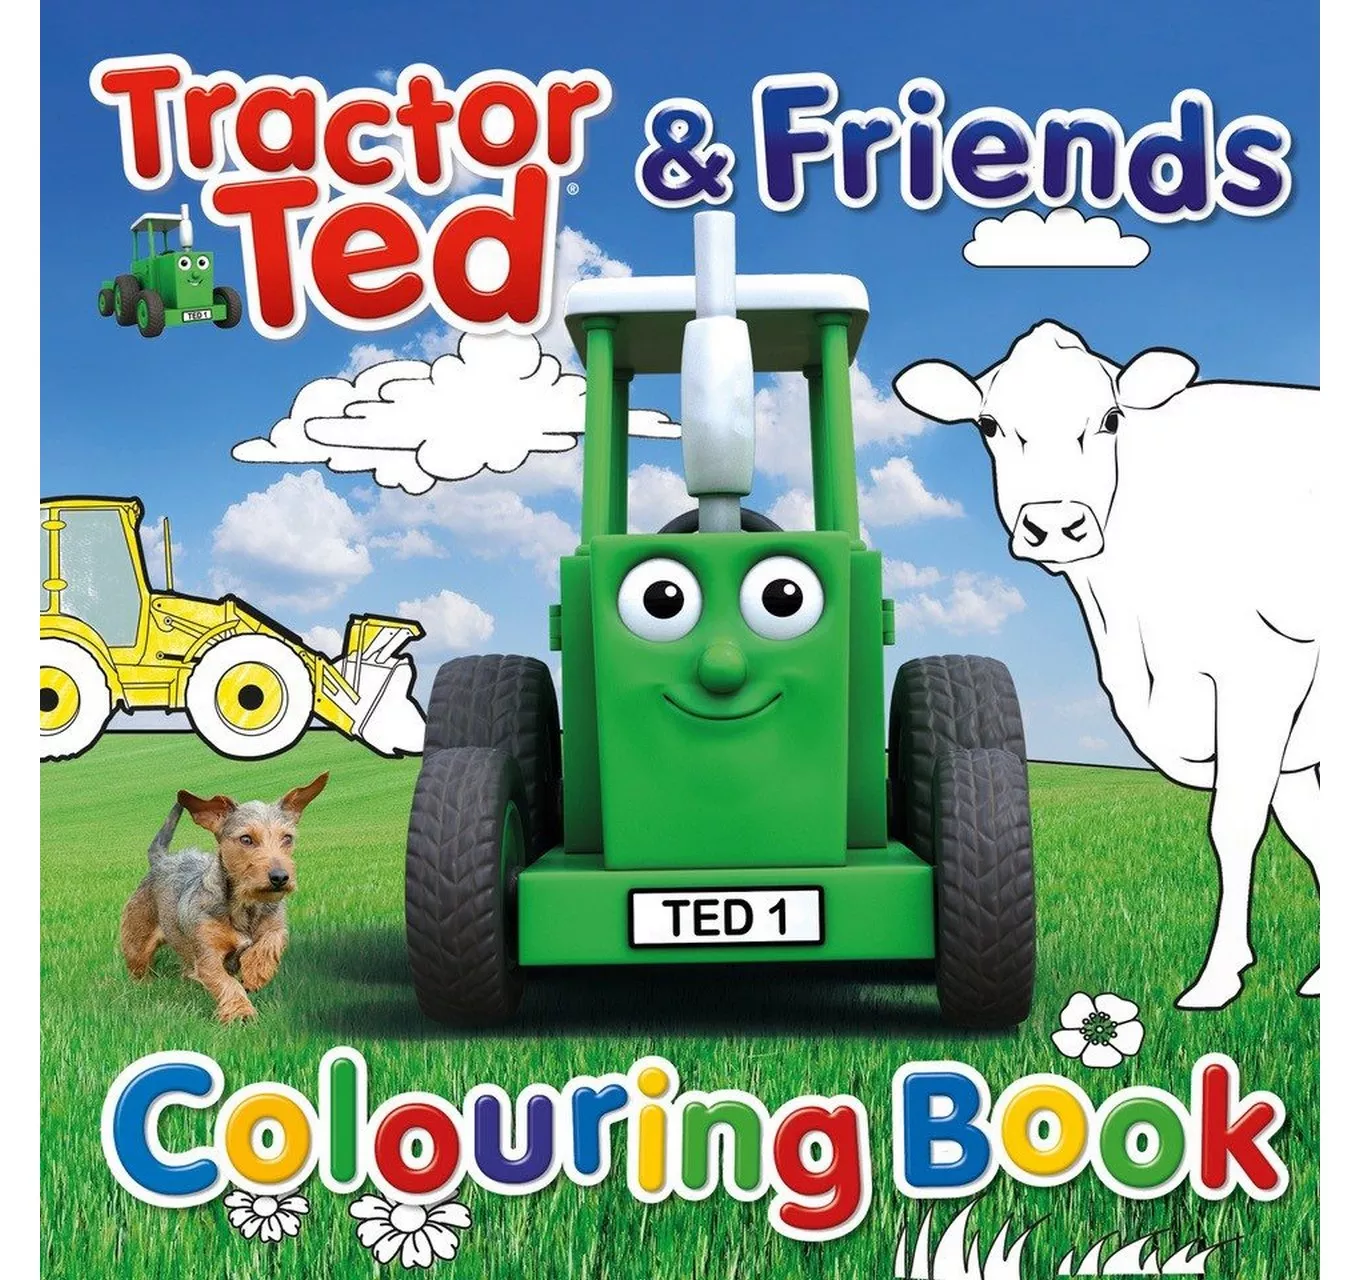 Tractor Ted Colouring Book